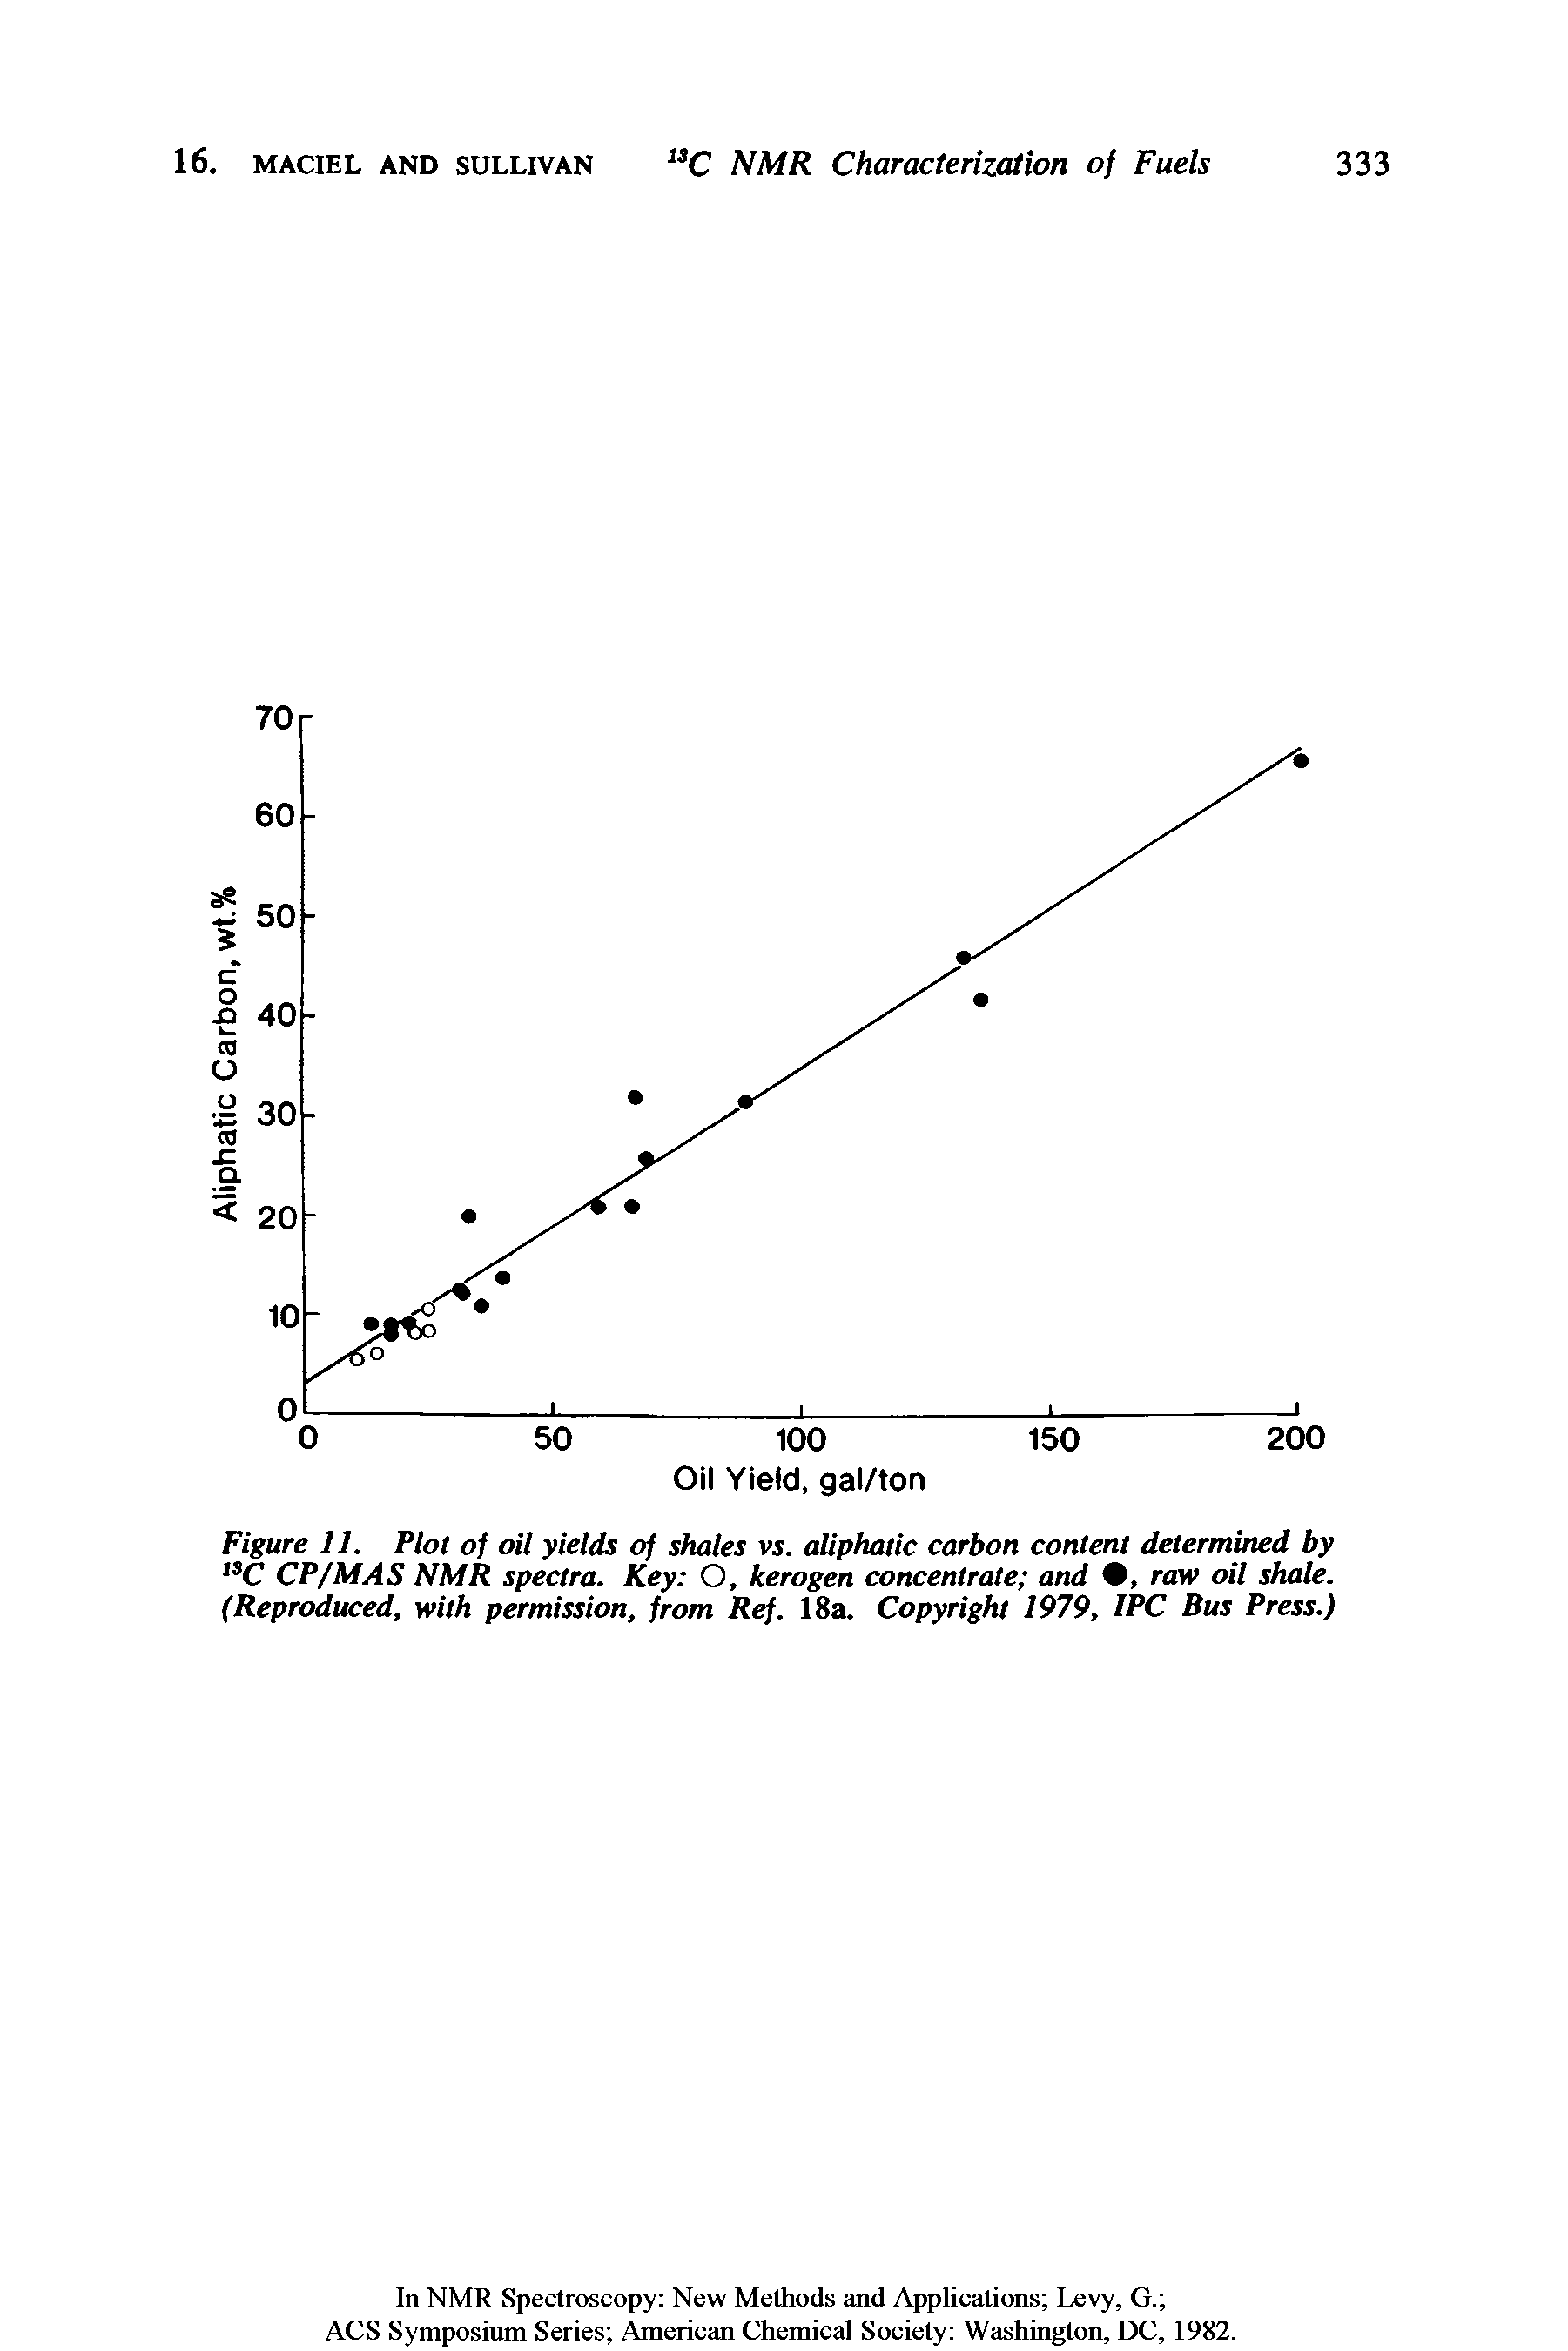 Figure 11. Plot of oil yields of shales vs. aliphatic carbon content determined by C CP/MAS NMR spectra. Key O, kerogen concentrate and , raw oil shale. (Reproduced, with permission, from Ref. 18a. Copyright 1979, IPC Bus Press.)...